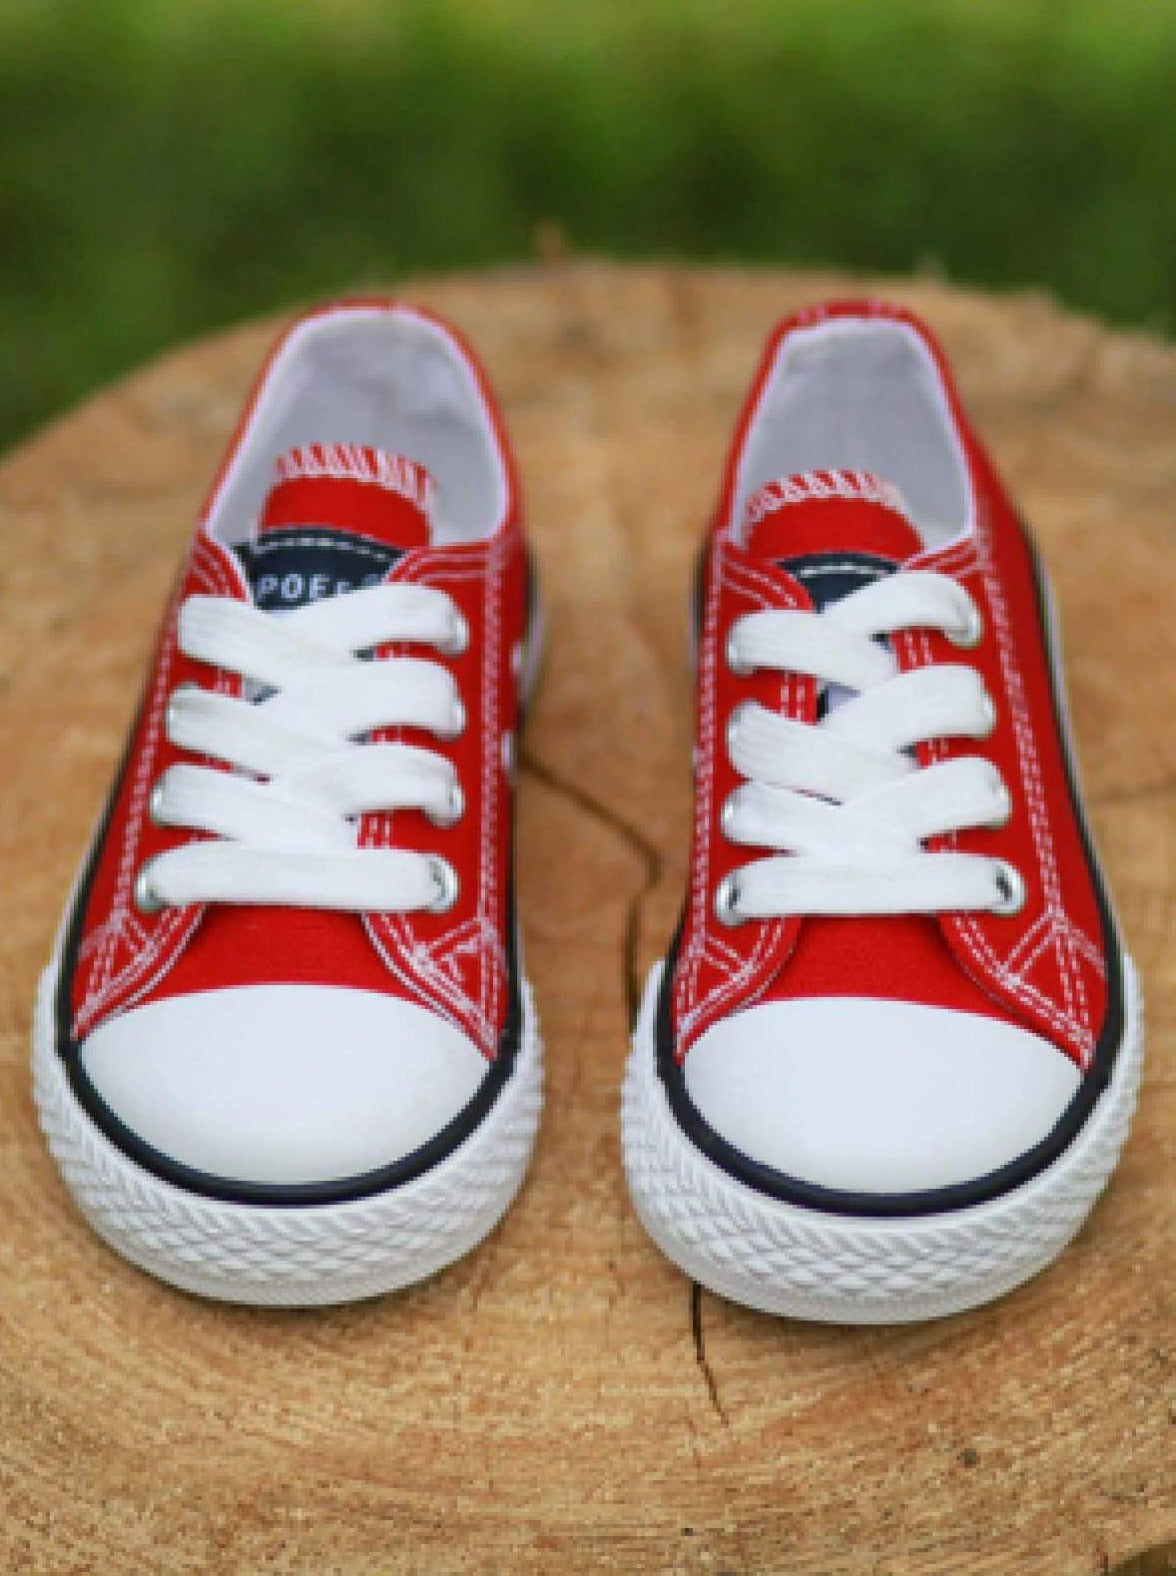 Back To School Shoes | Low Top Canvas Sneakers | Mia Belle Girls